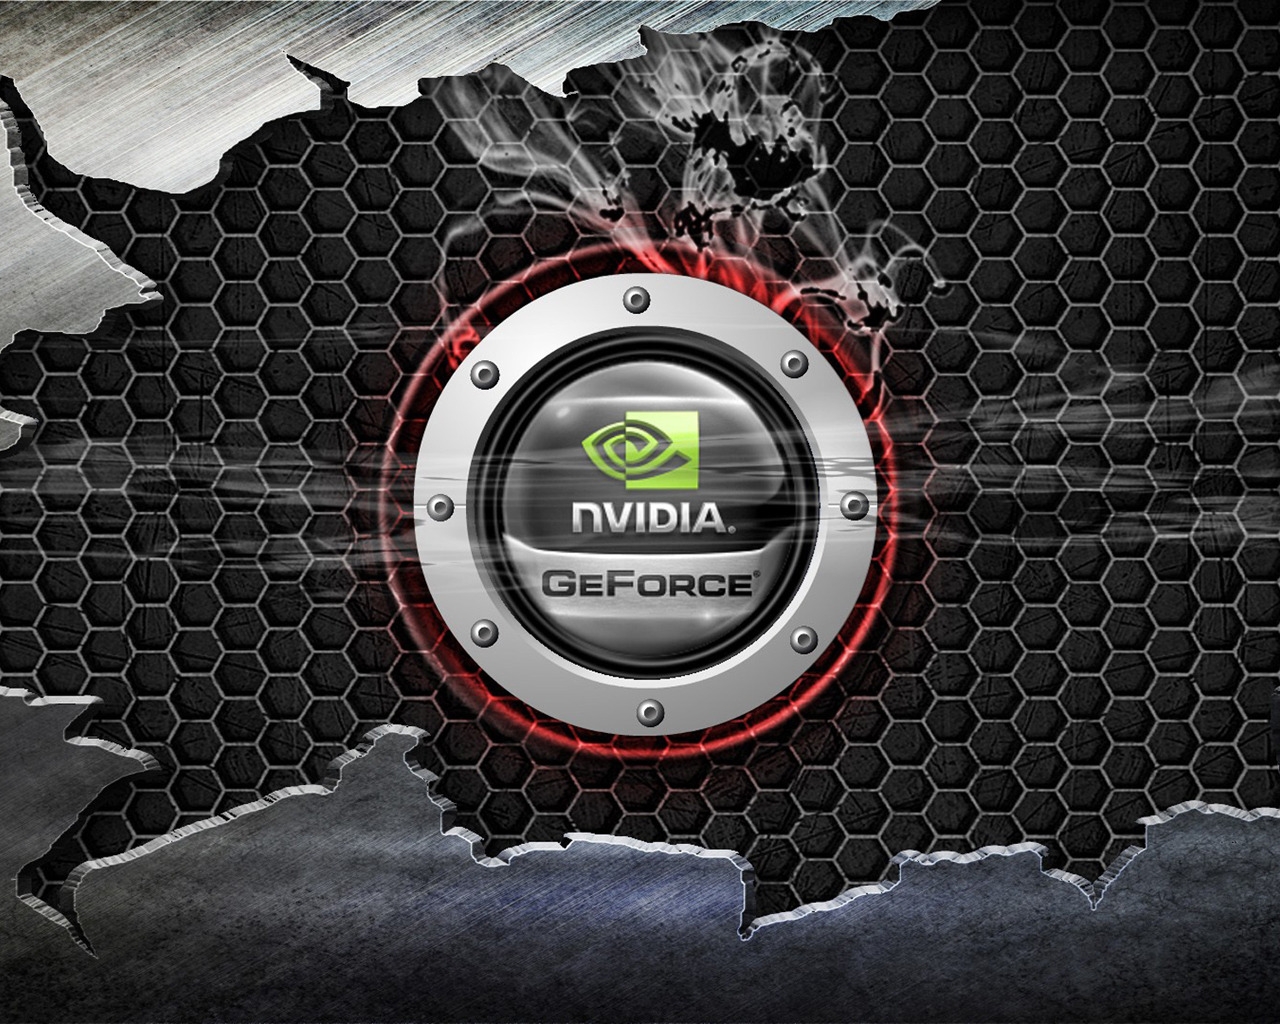 nVIDIA for 1280 x 1024 resolution